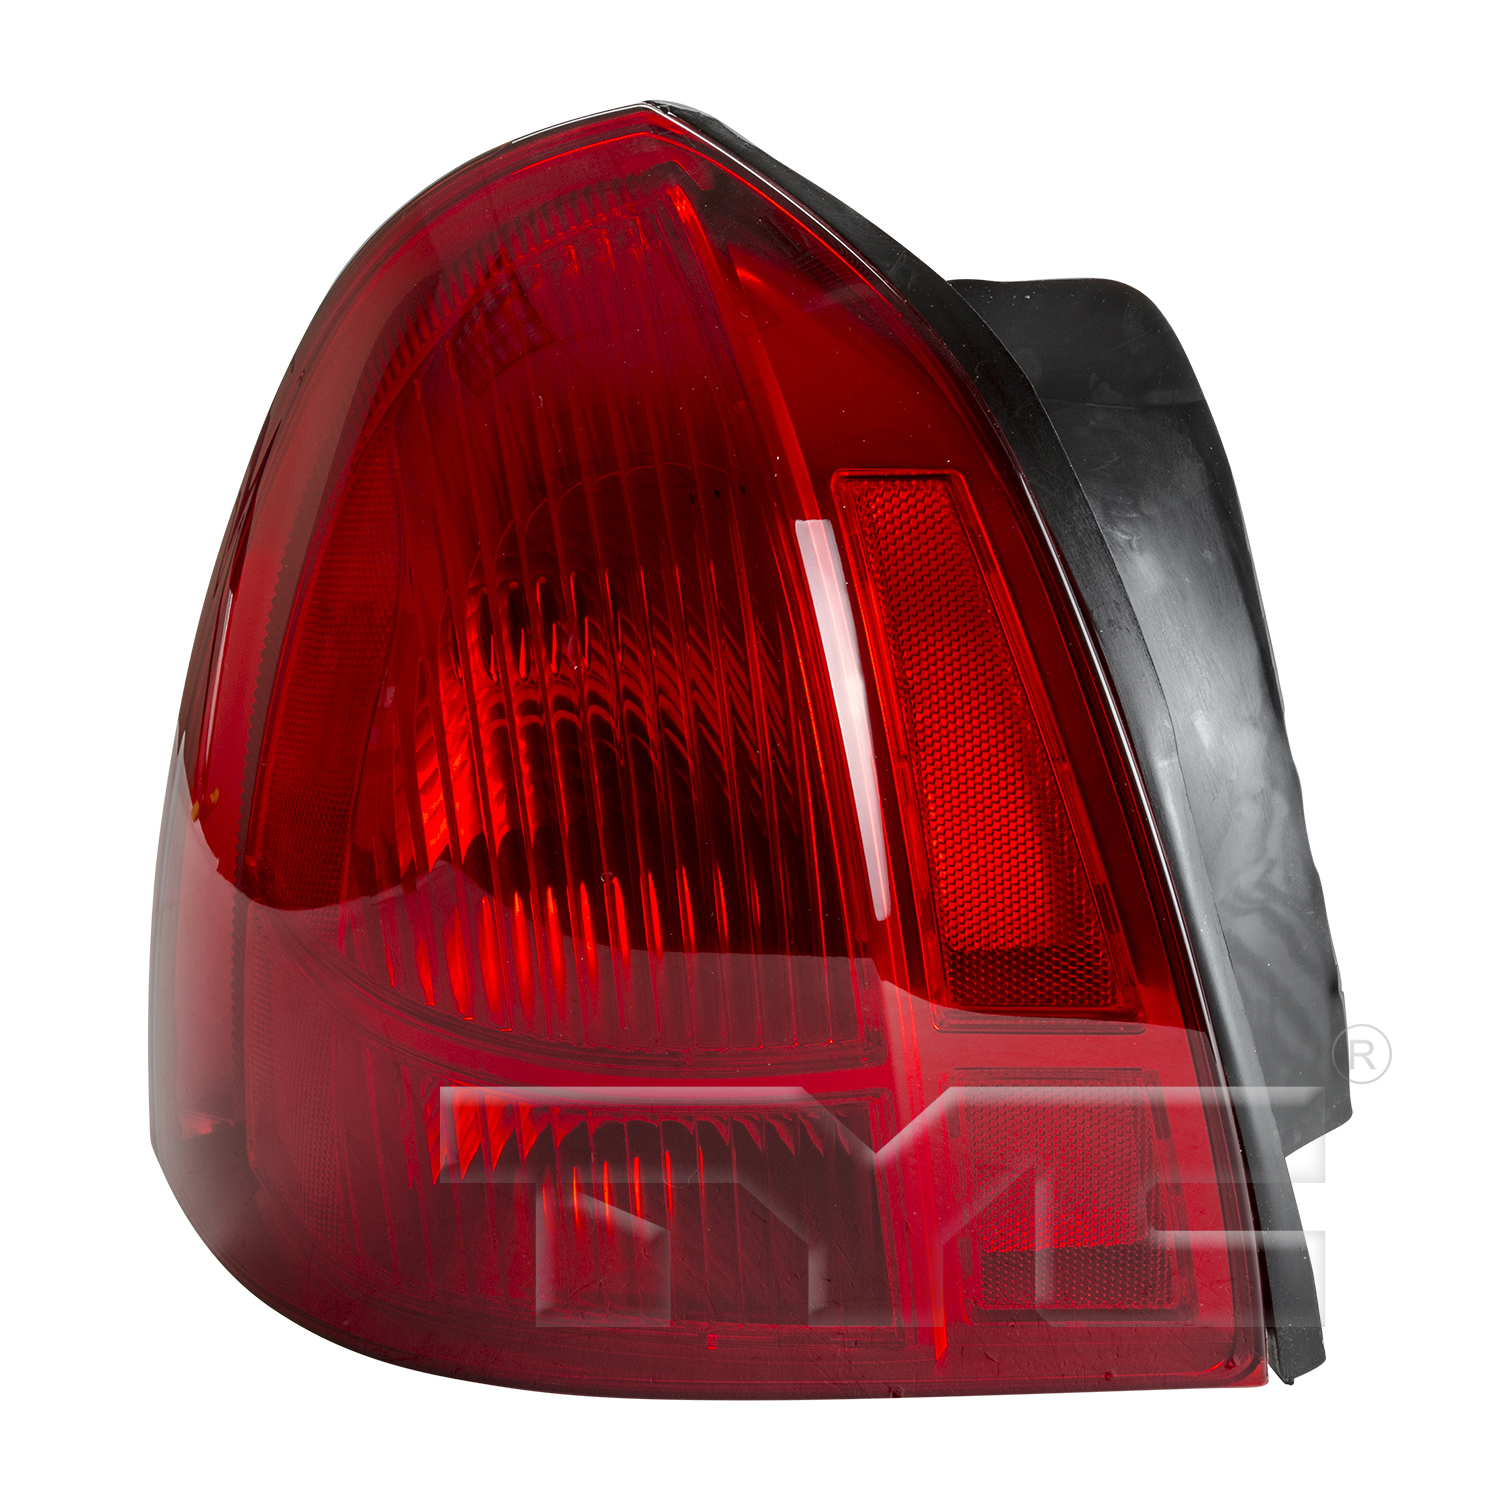 Aftermarket TAILLIGHTS for LINCOLN - TOWN CAR, TOWN CAR,03-05,LT Taillamp assy